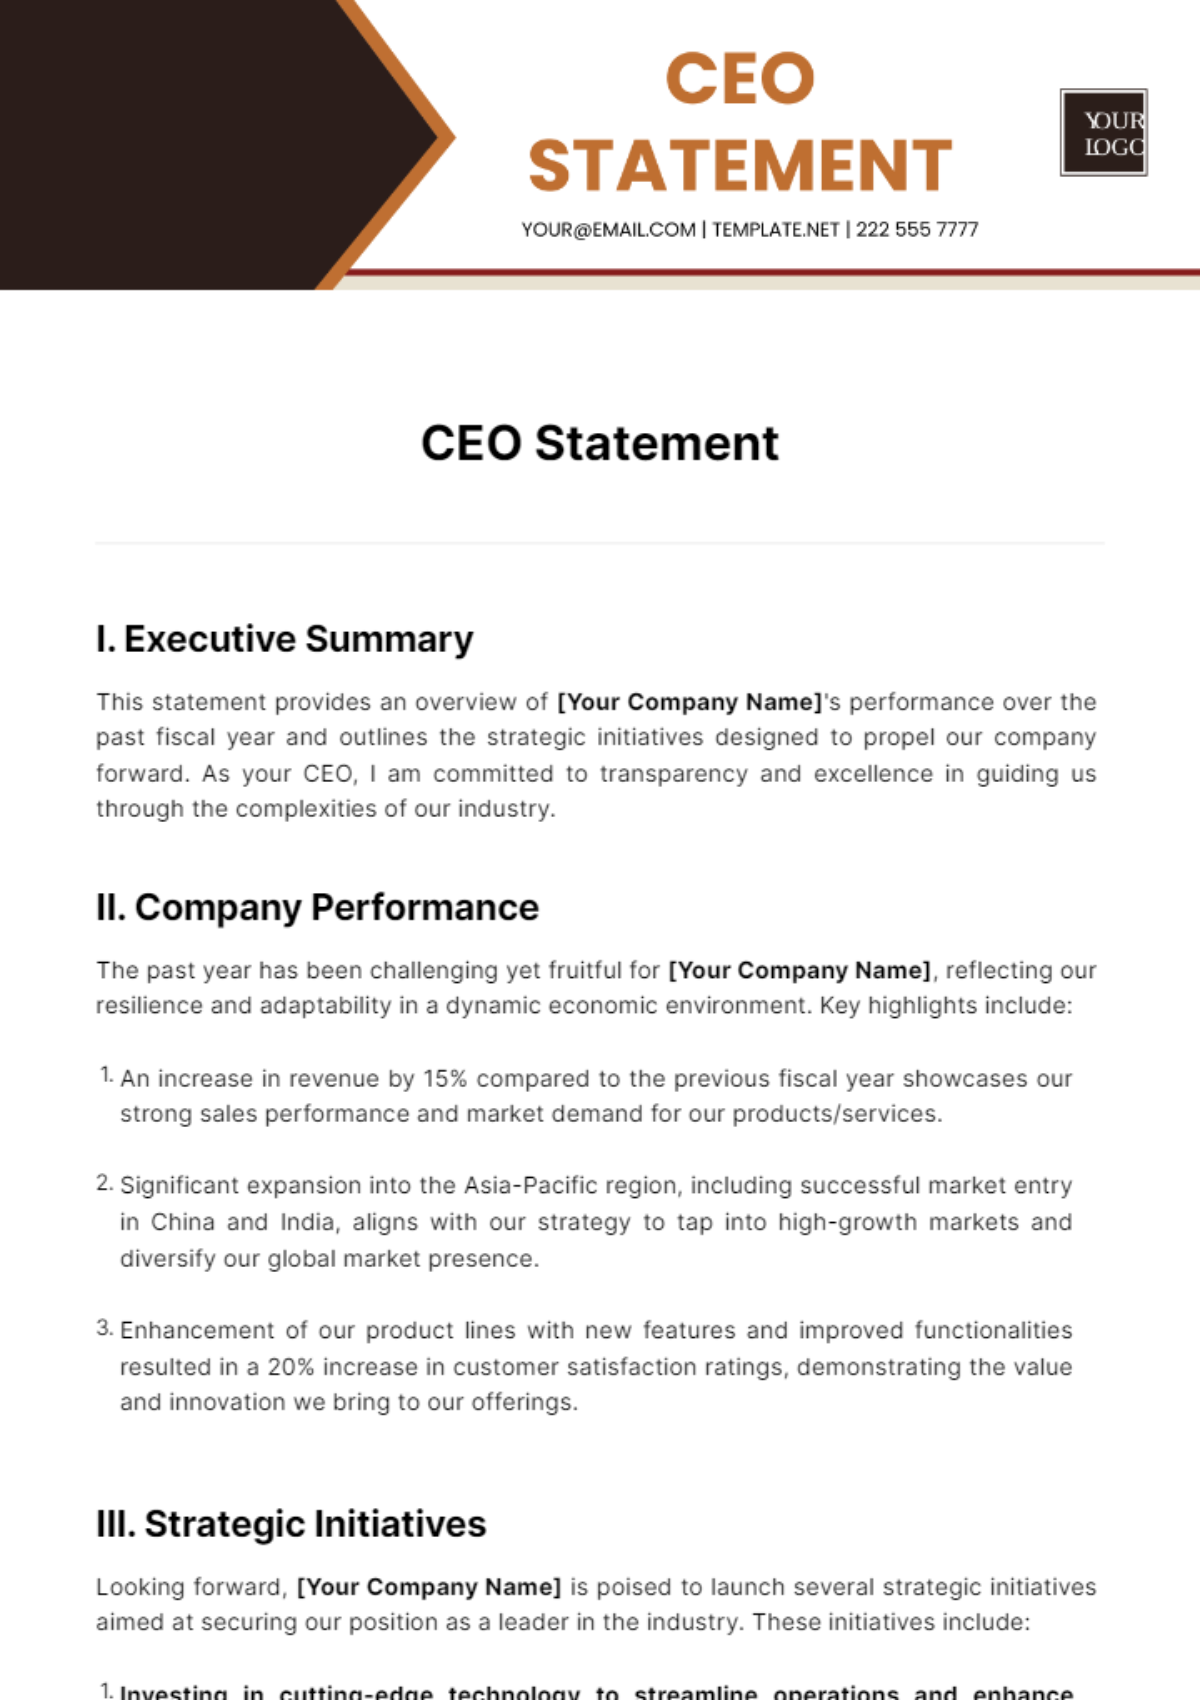 CEO Statement Template